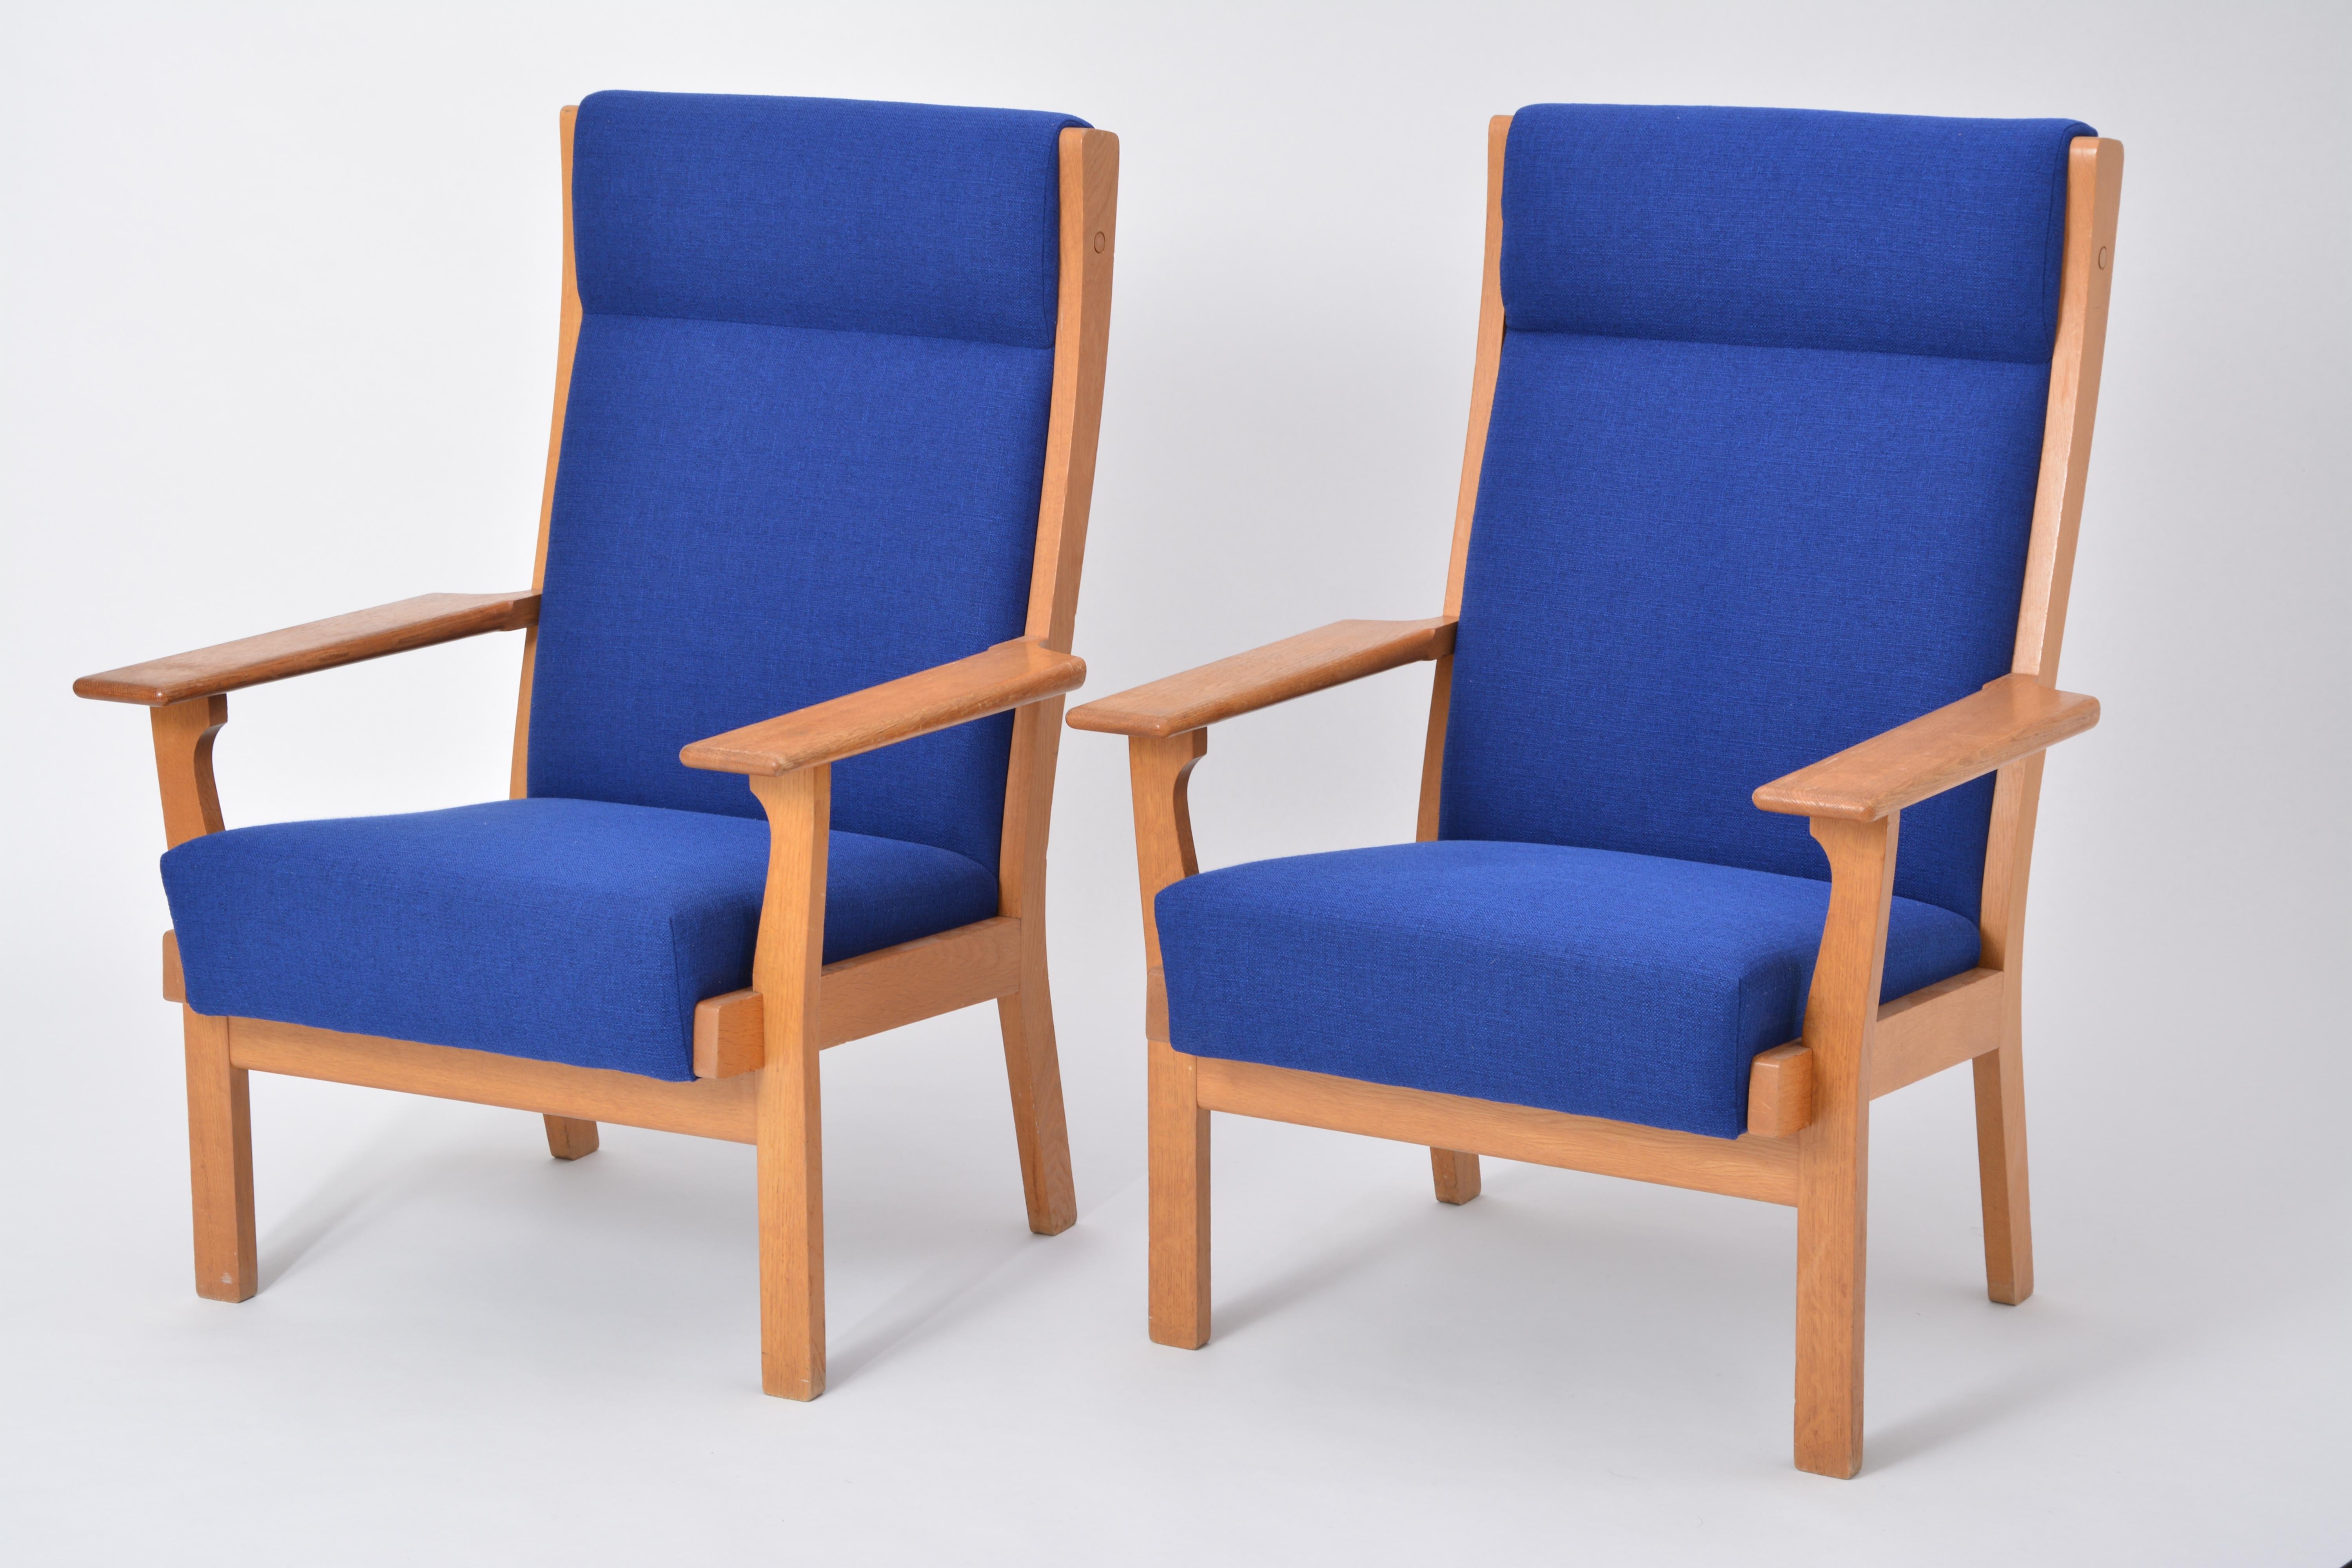 Set of Two Danish Mid-Century Modern GE 181 A chairs by Hans Wegner for GETAMA

This pair of armchairs (Model GE 181 A) was designed by Hans Wegner and produced by the Danish company GETAMA. The chairs are made from oak and have just been completely